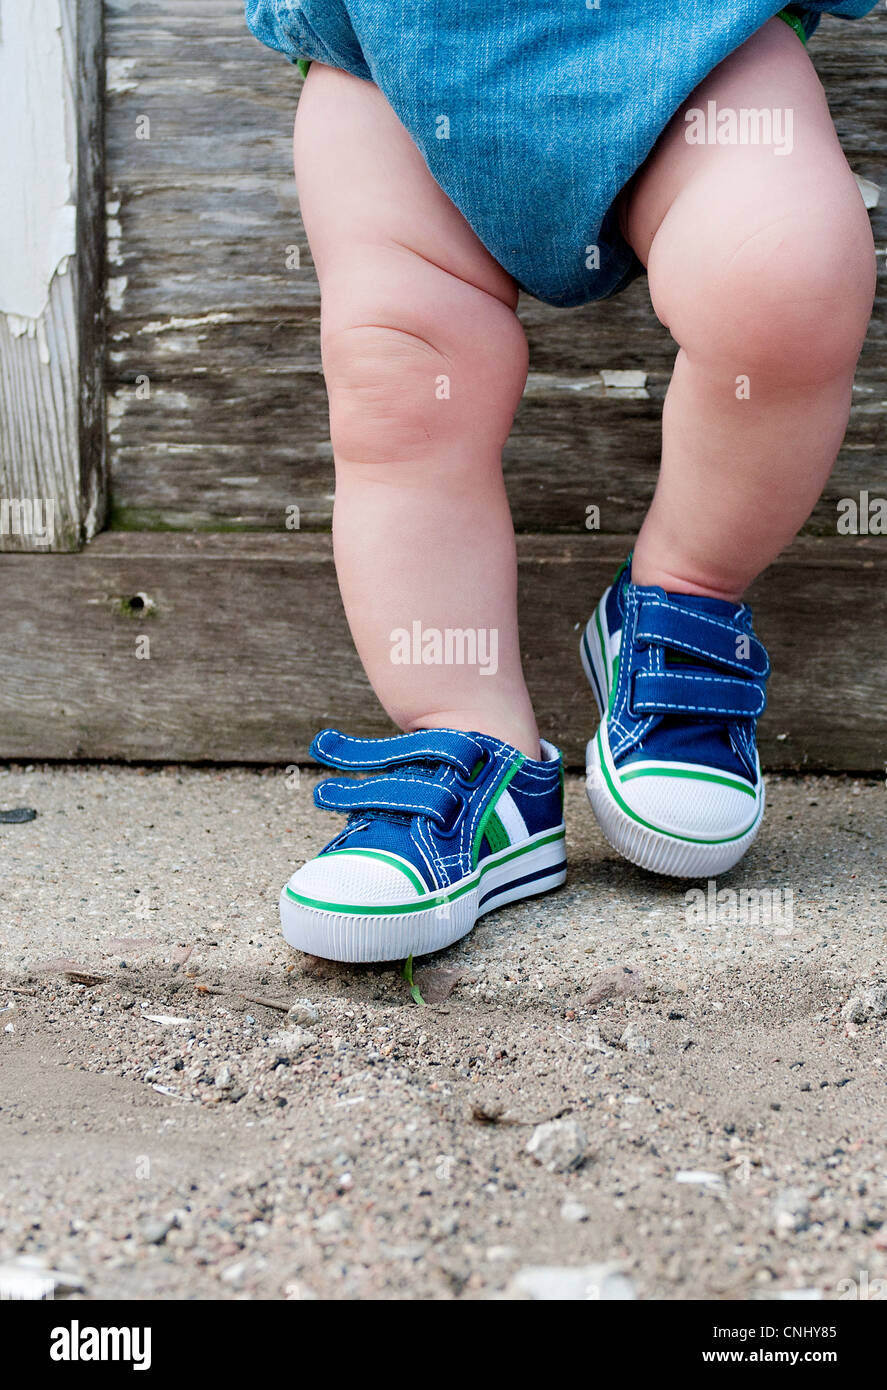 Legs of a toddler Stock Photo